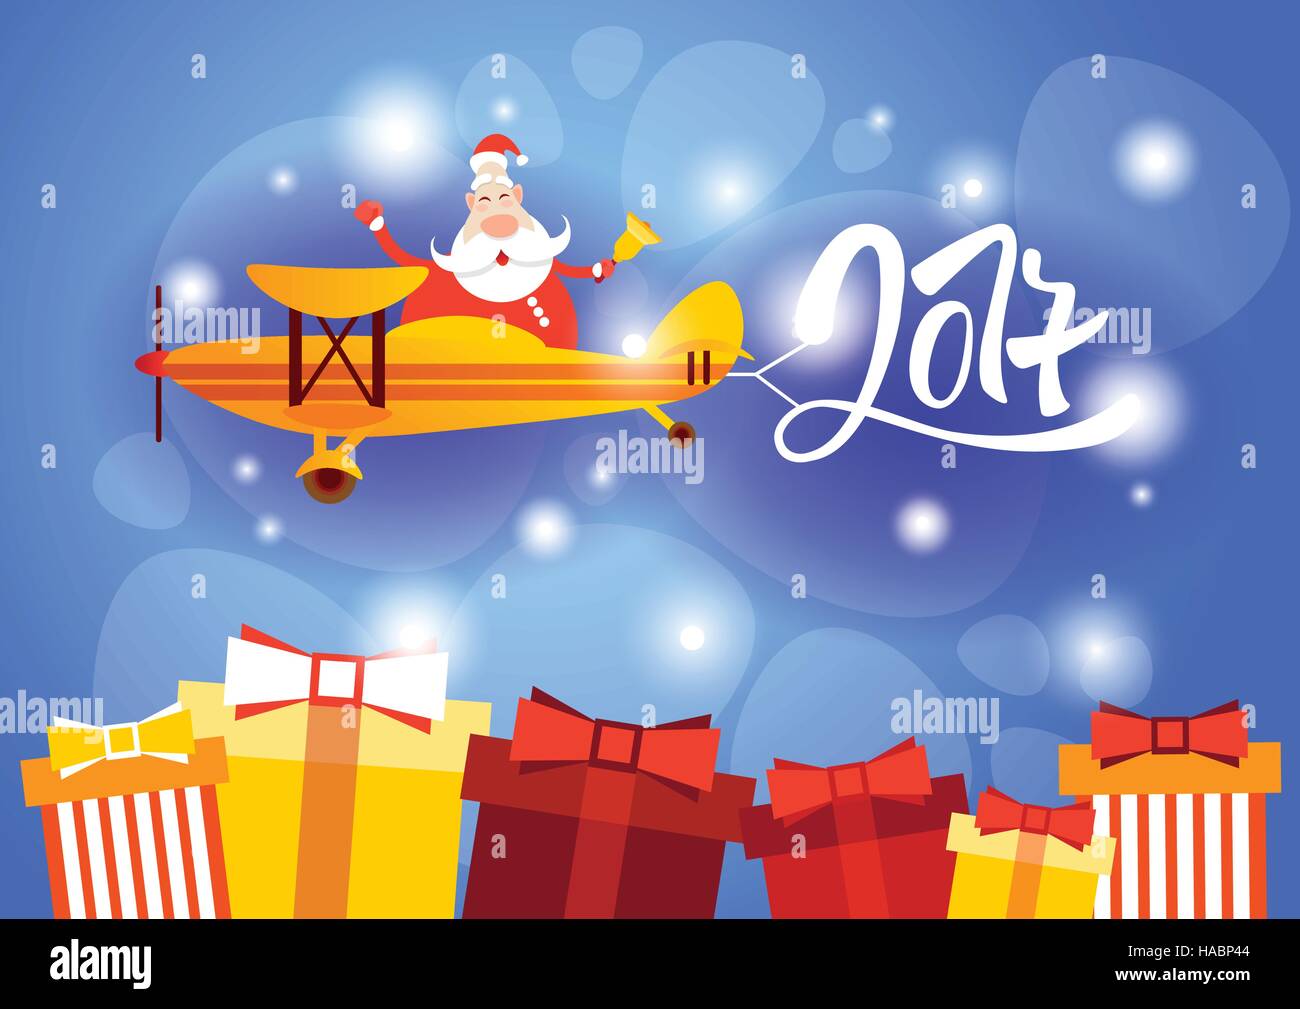 Santa Clause Flying Airplane Happy New Year Decoration Greeting Card Celebration Banner Stock Image